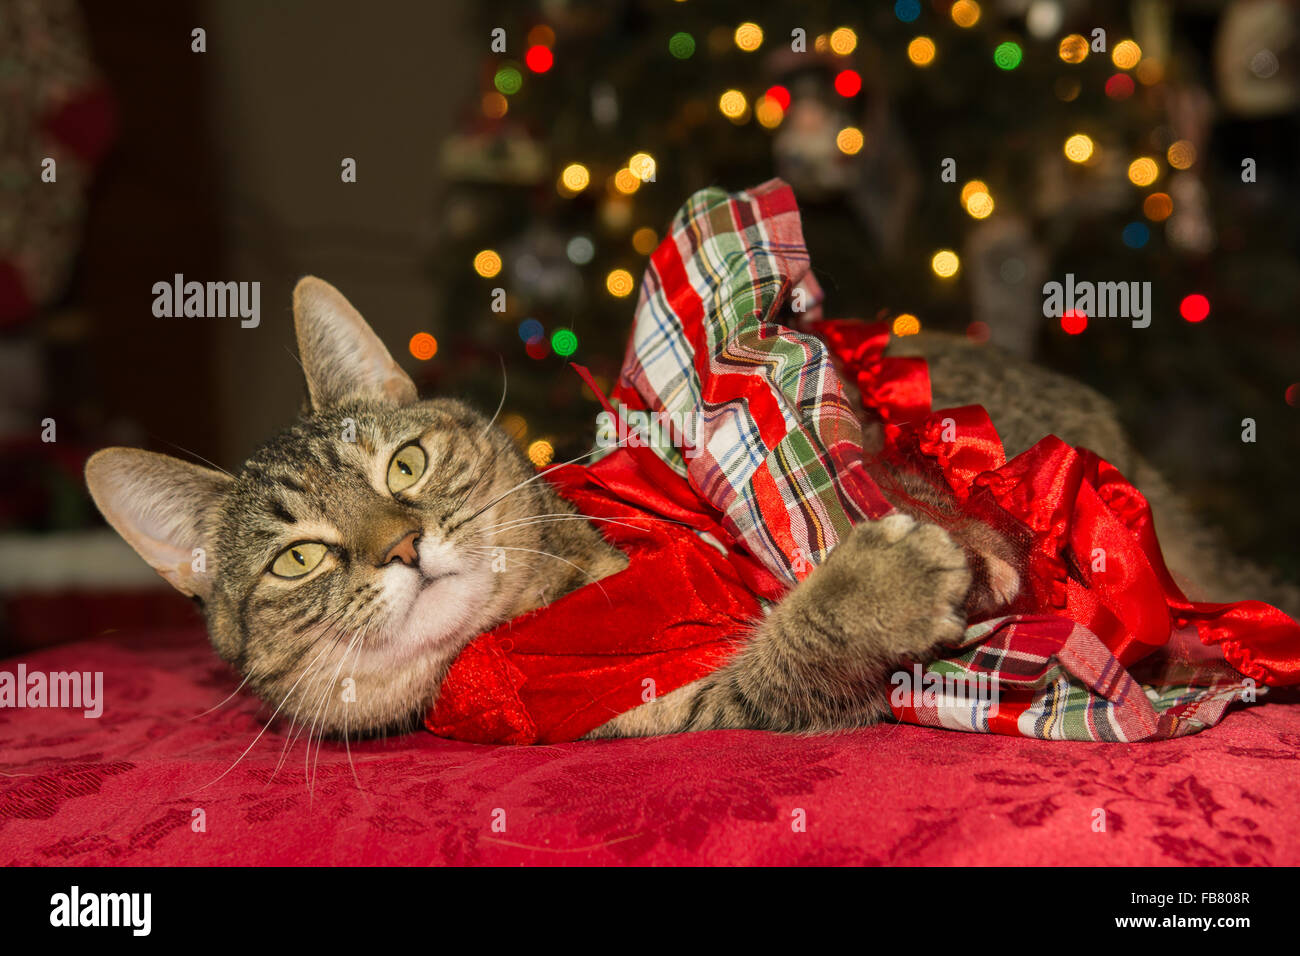 Cute cat wearing a dress on Christmas Stock Photo